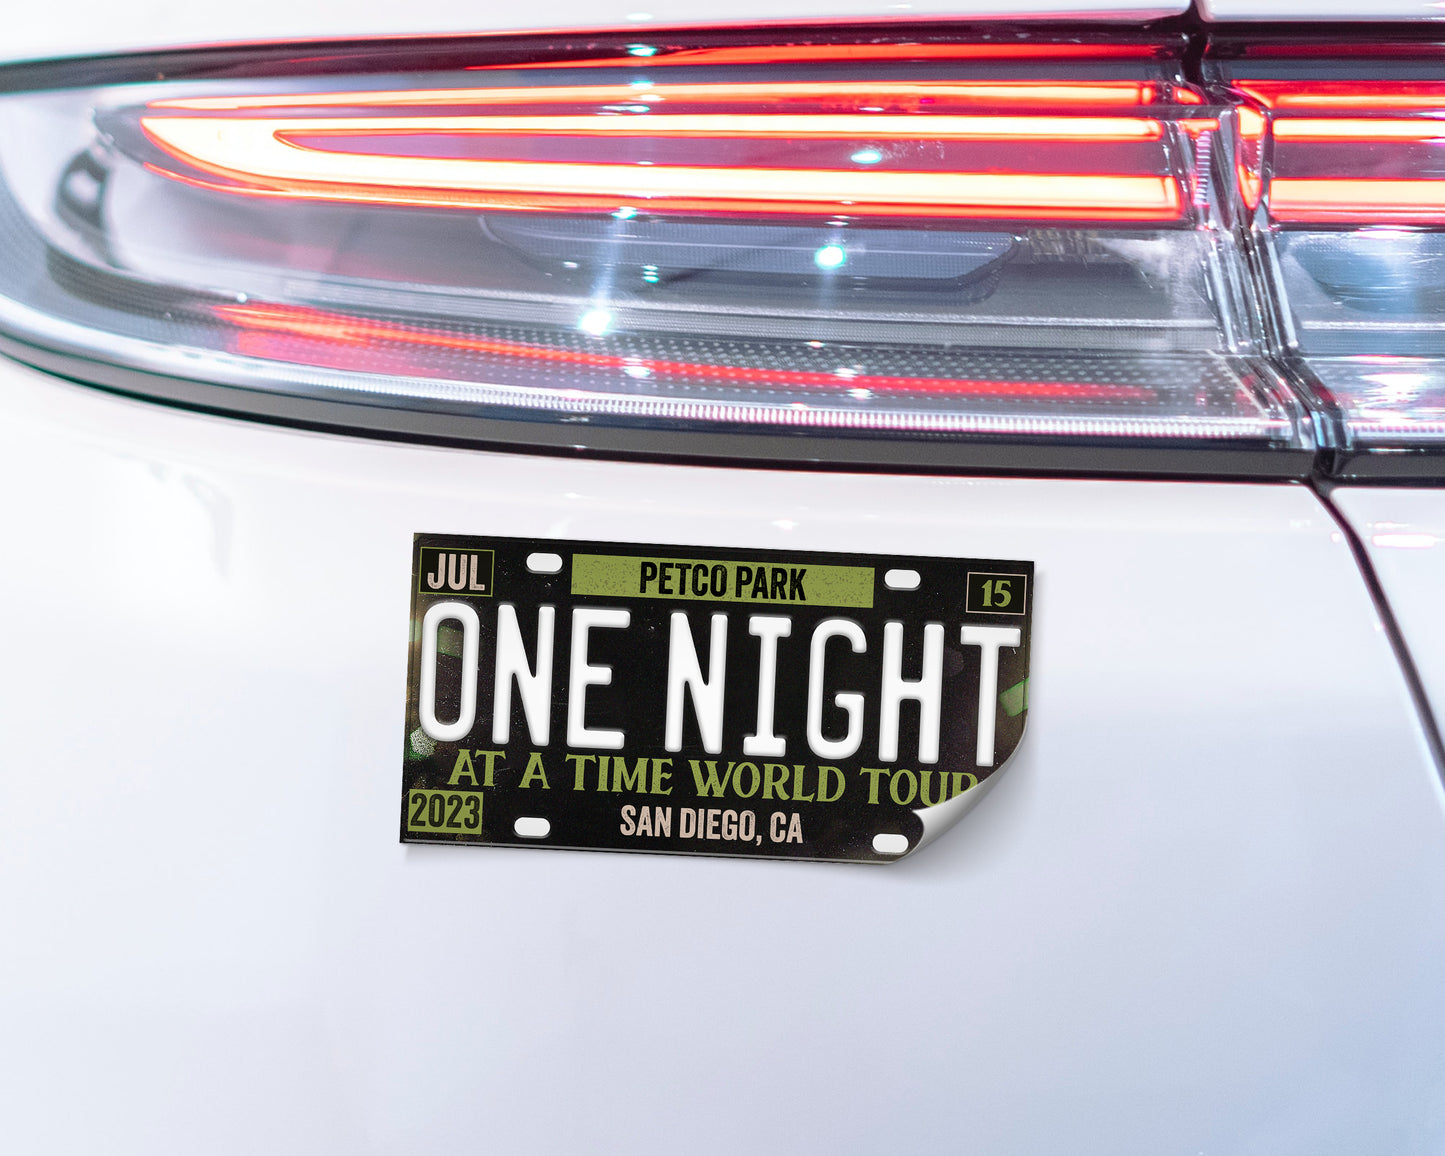 One Night at a Time World Tour bumper sticker